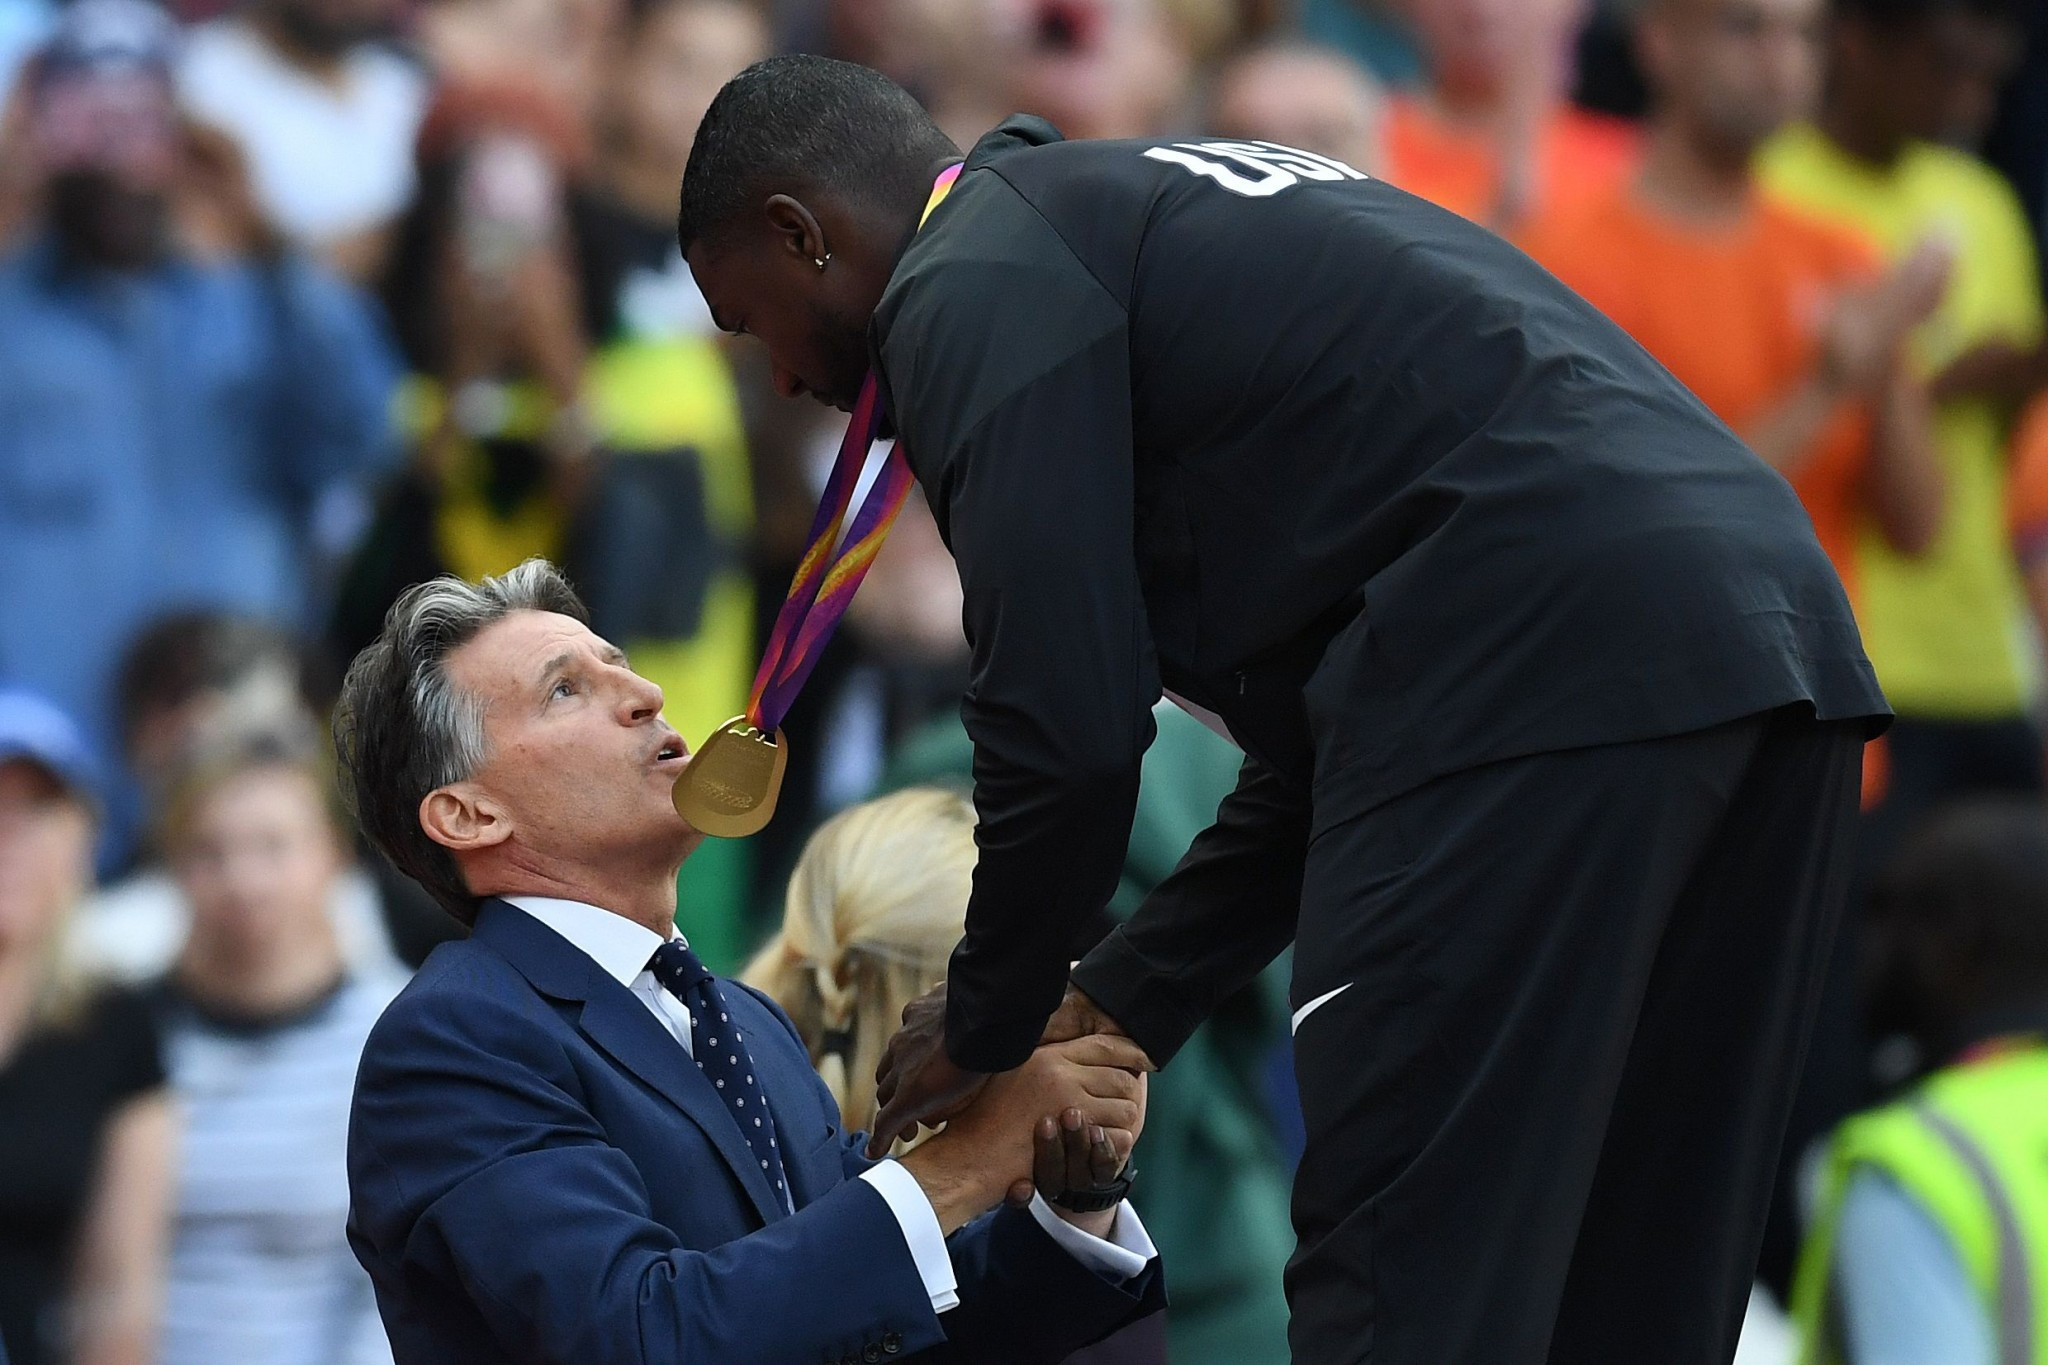 Justin Gatlin received his gold medal from IAAF President Sebastian Coe ©Getty Images